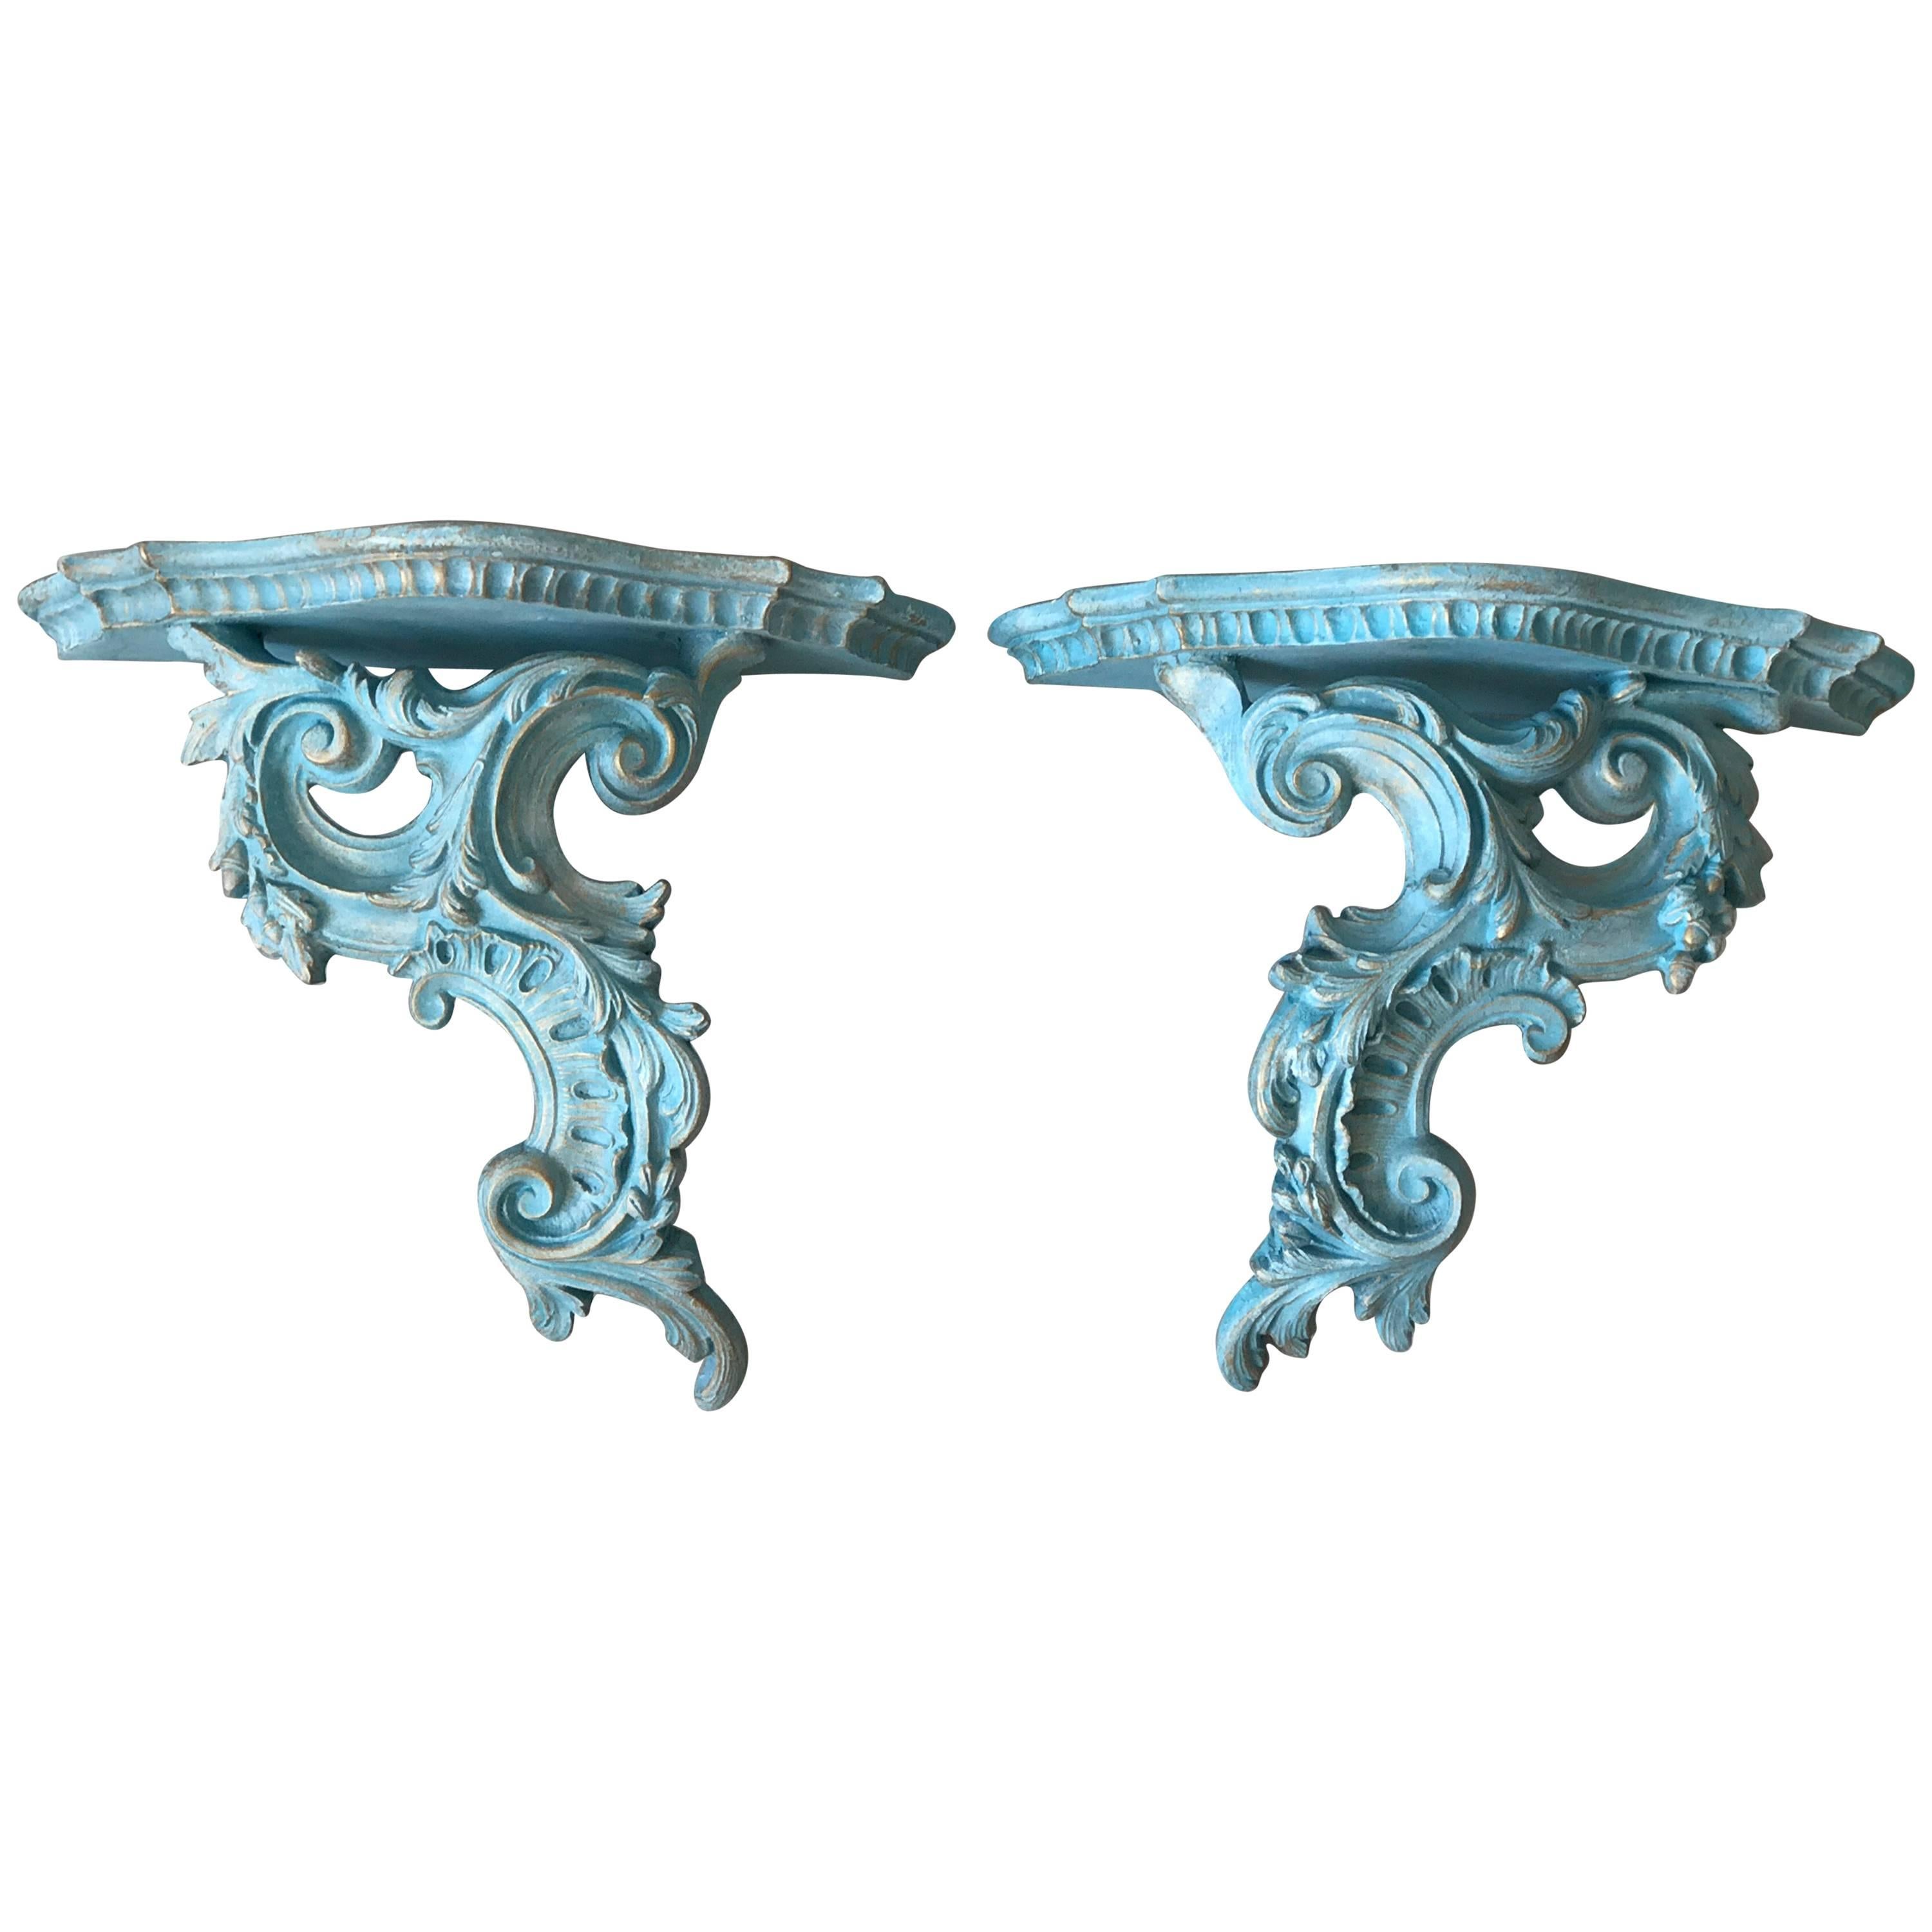 1980s Blue and Gold Rococo Style Wood Wall Shelves, Pair